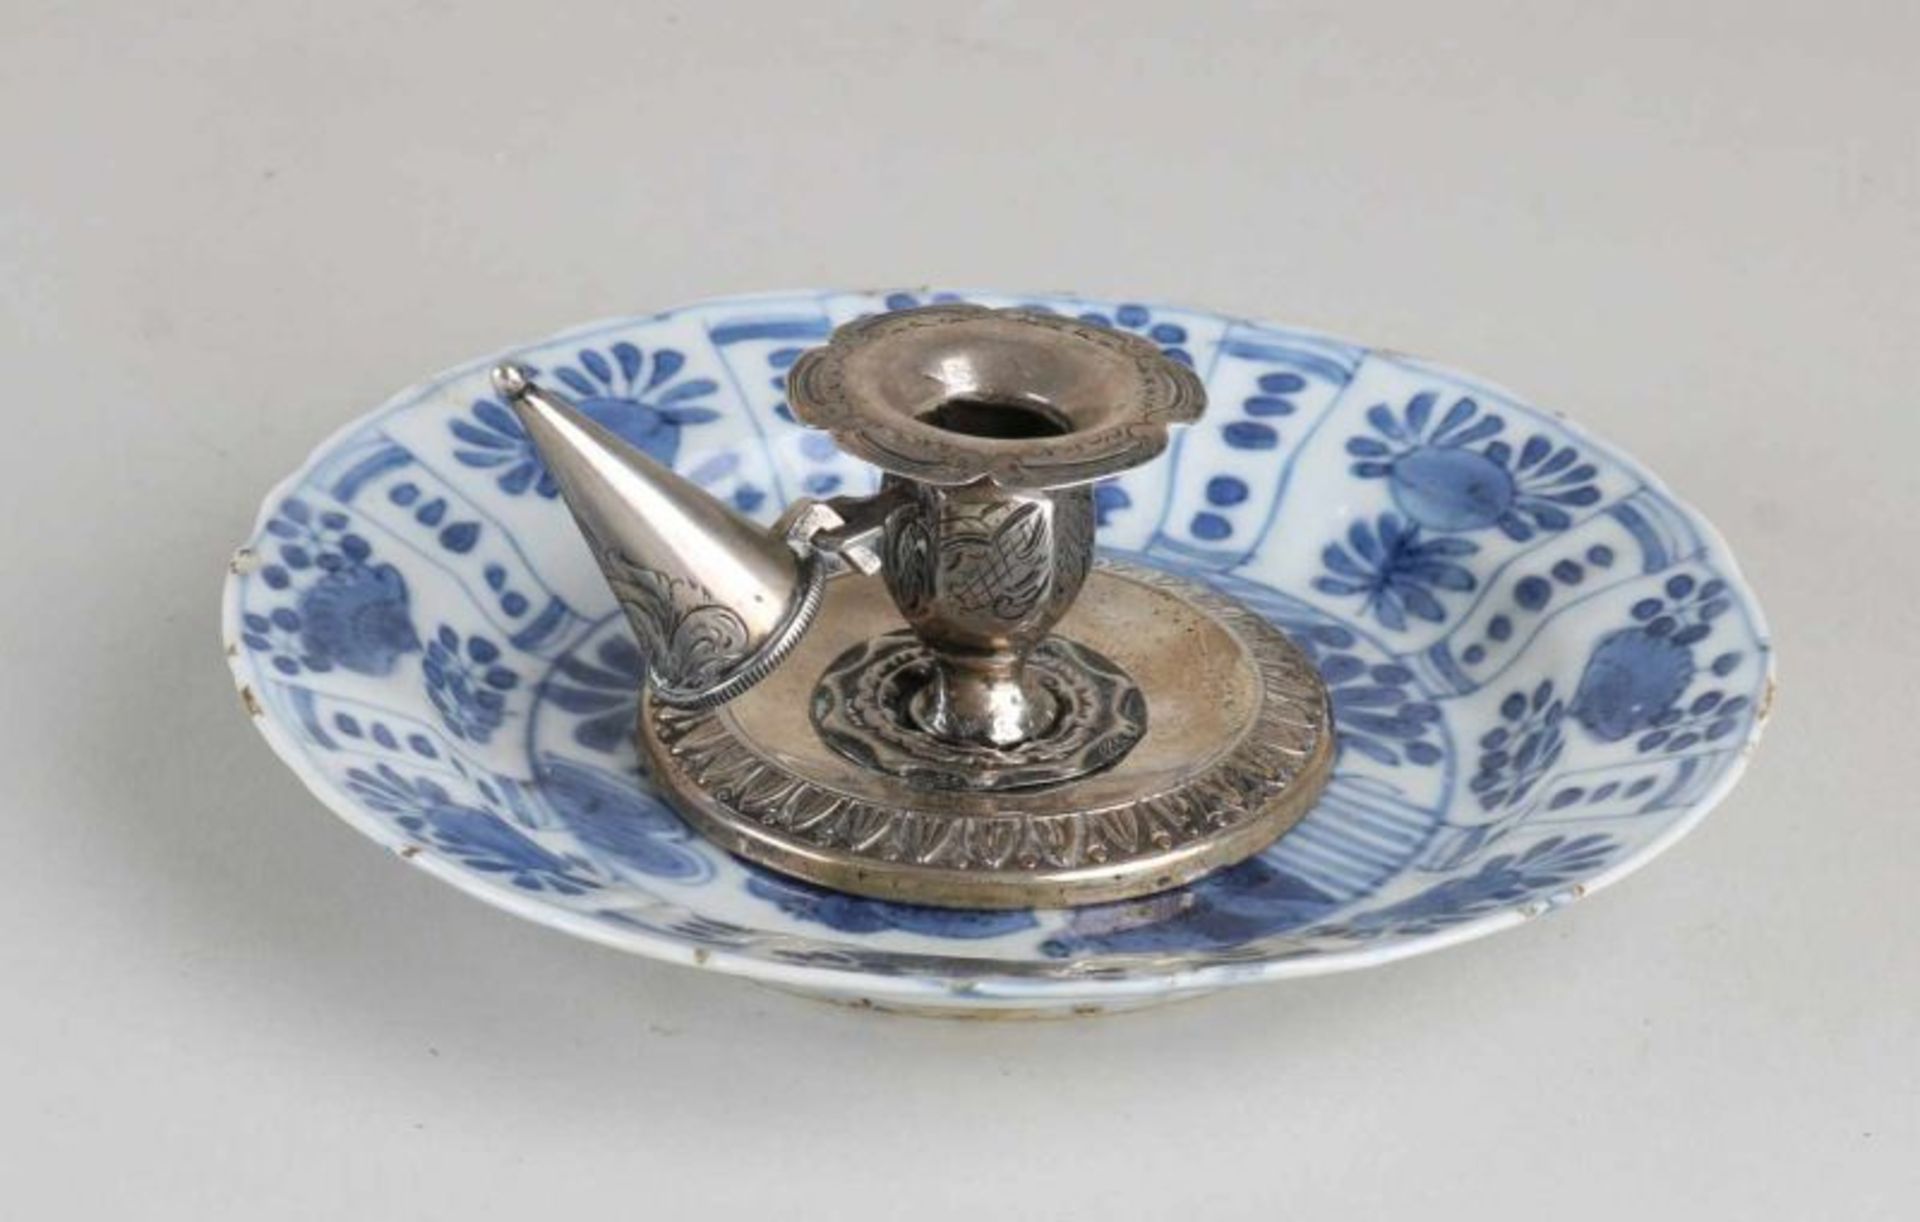 18th century Chinese porcelain dish with 19th century mounted silver candle holder + dover.